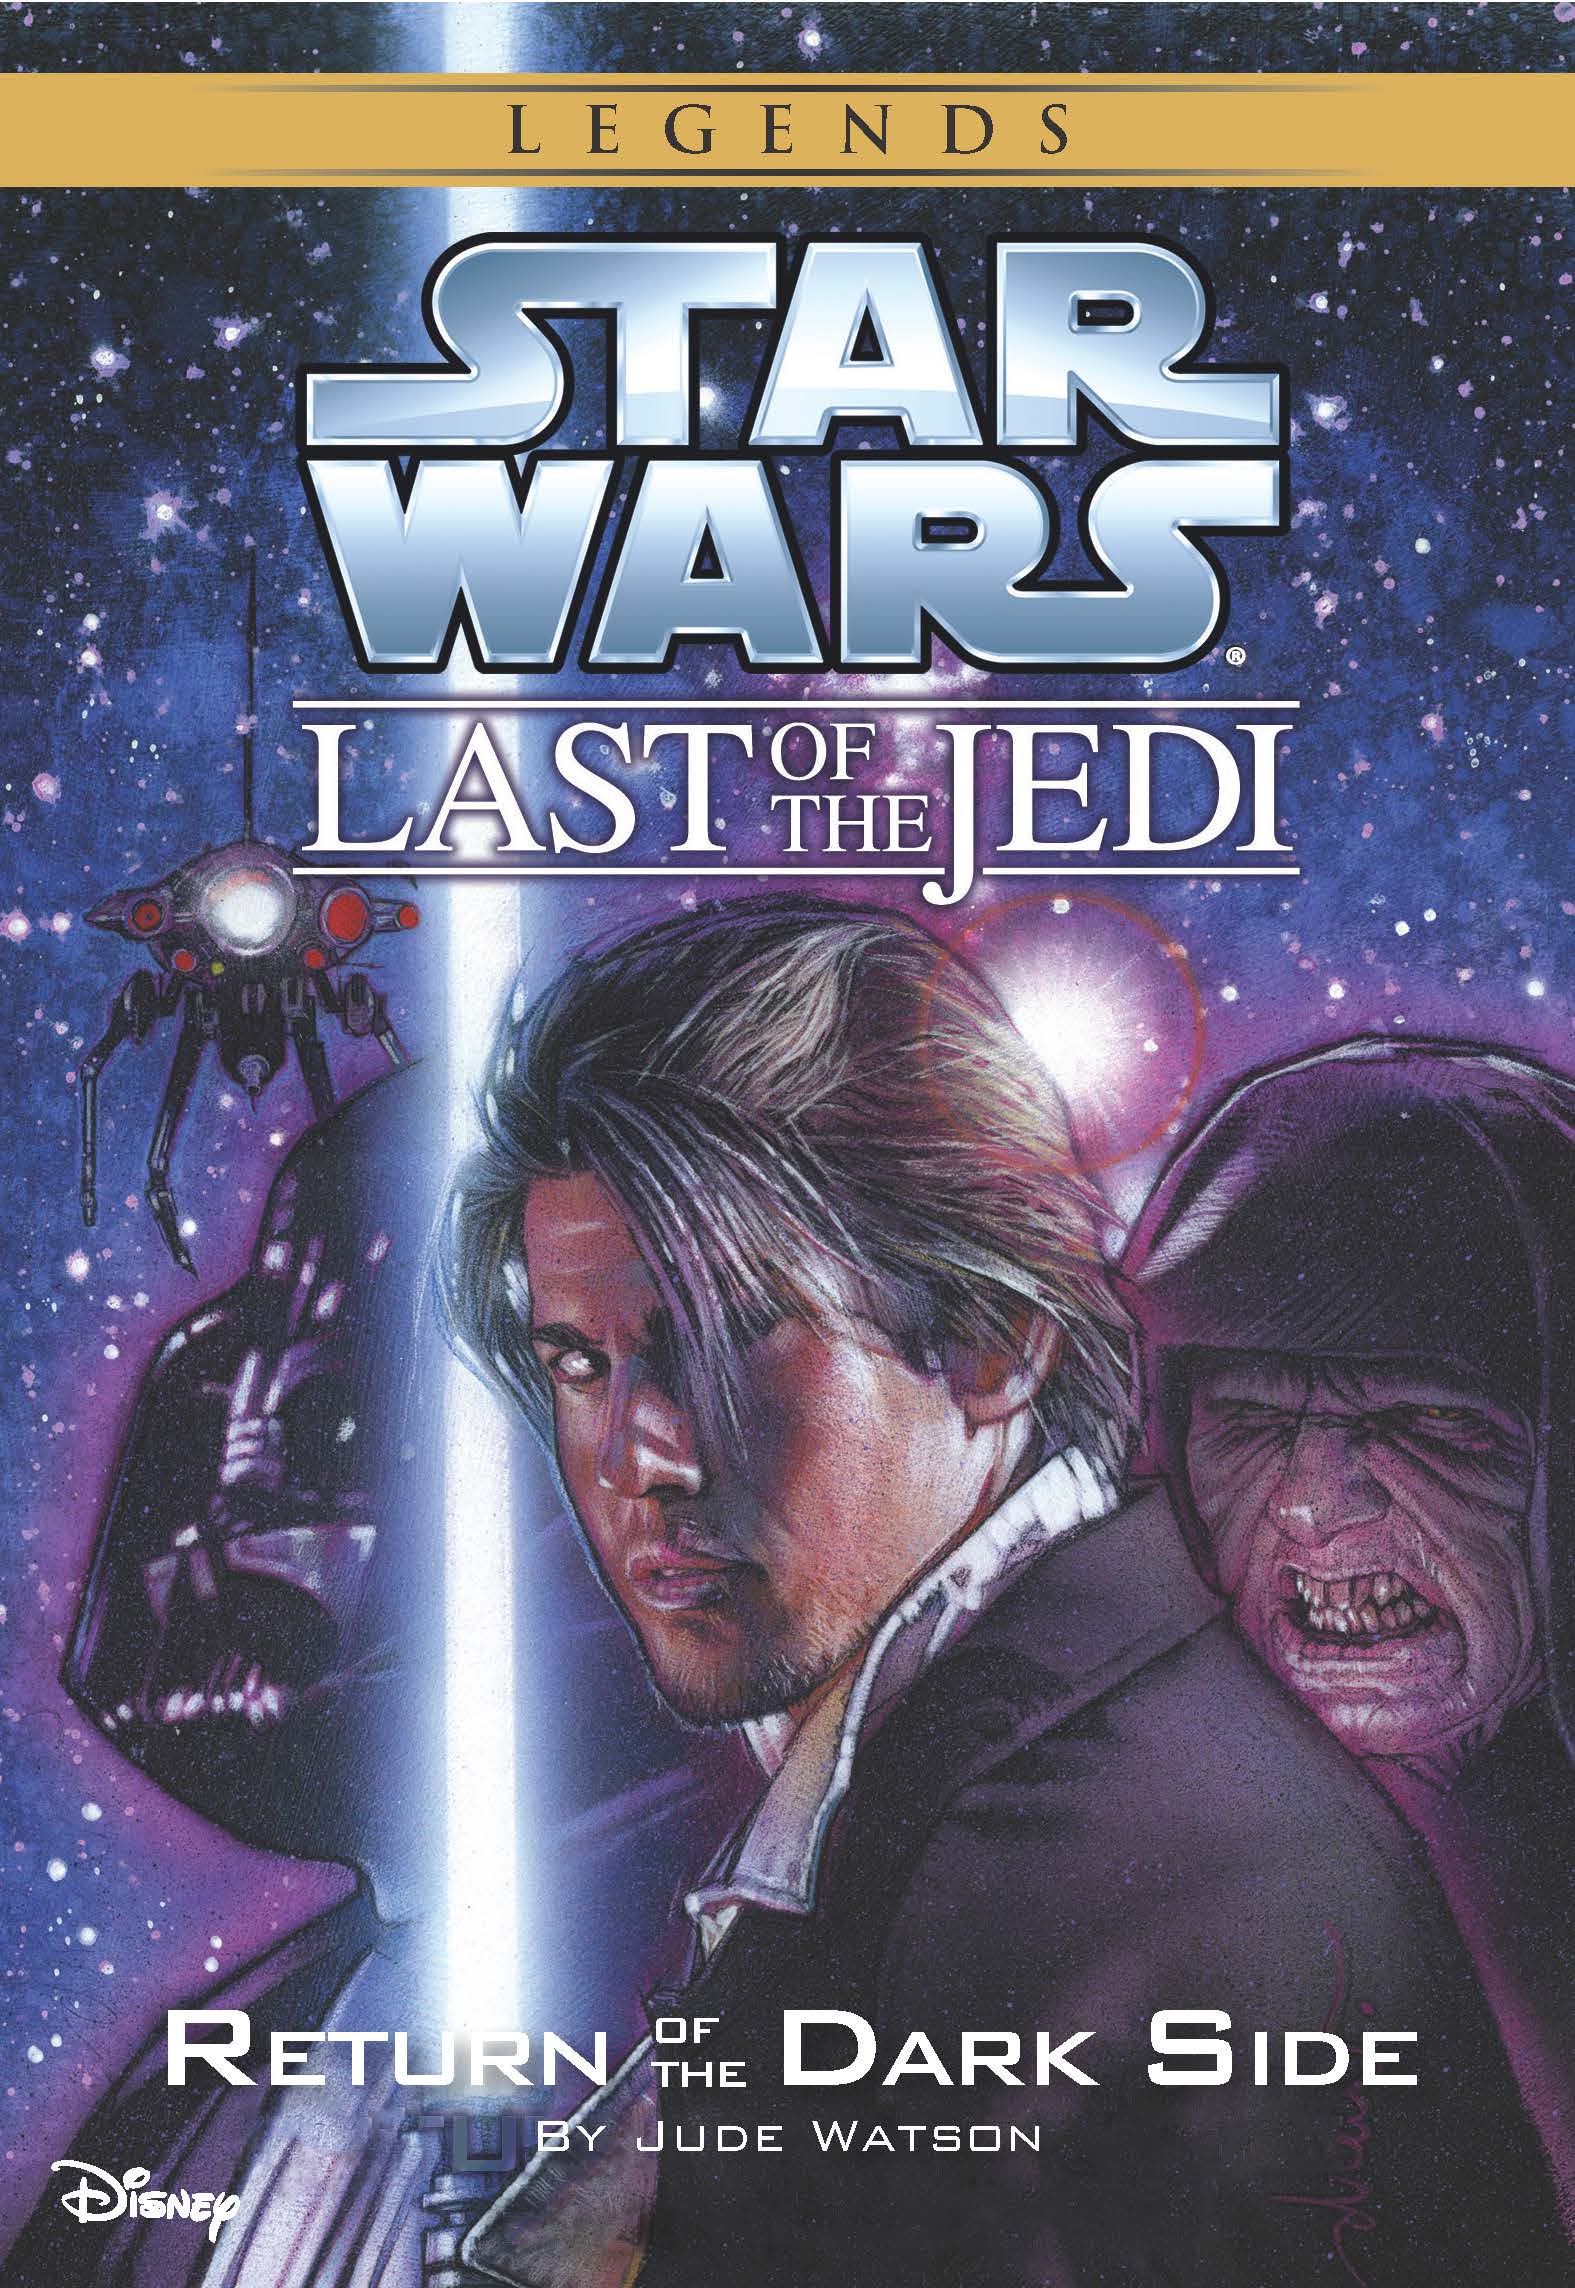 Secret Weapon (Volume 7) Star Wars: The Last of the Jedi by Jude